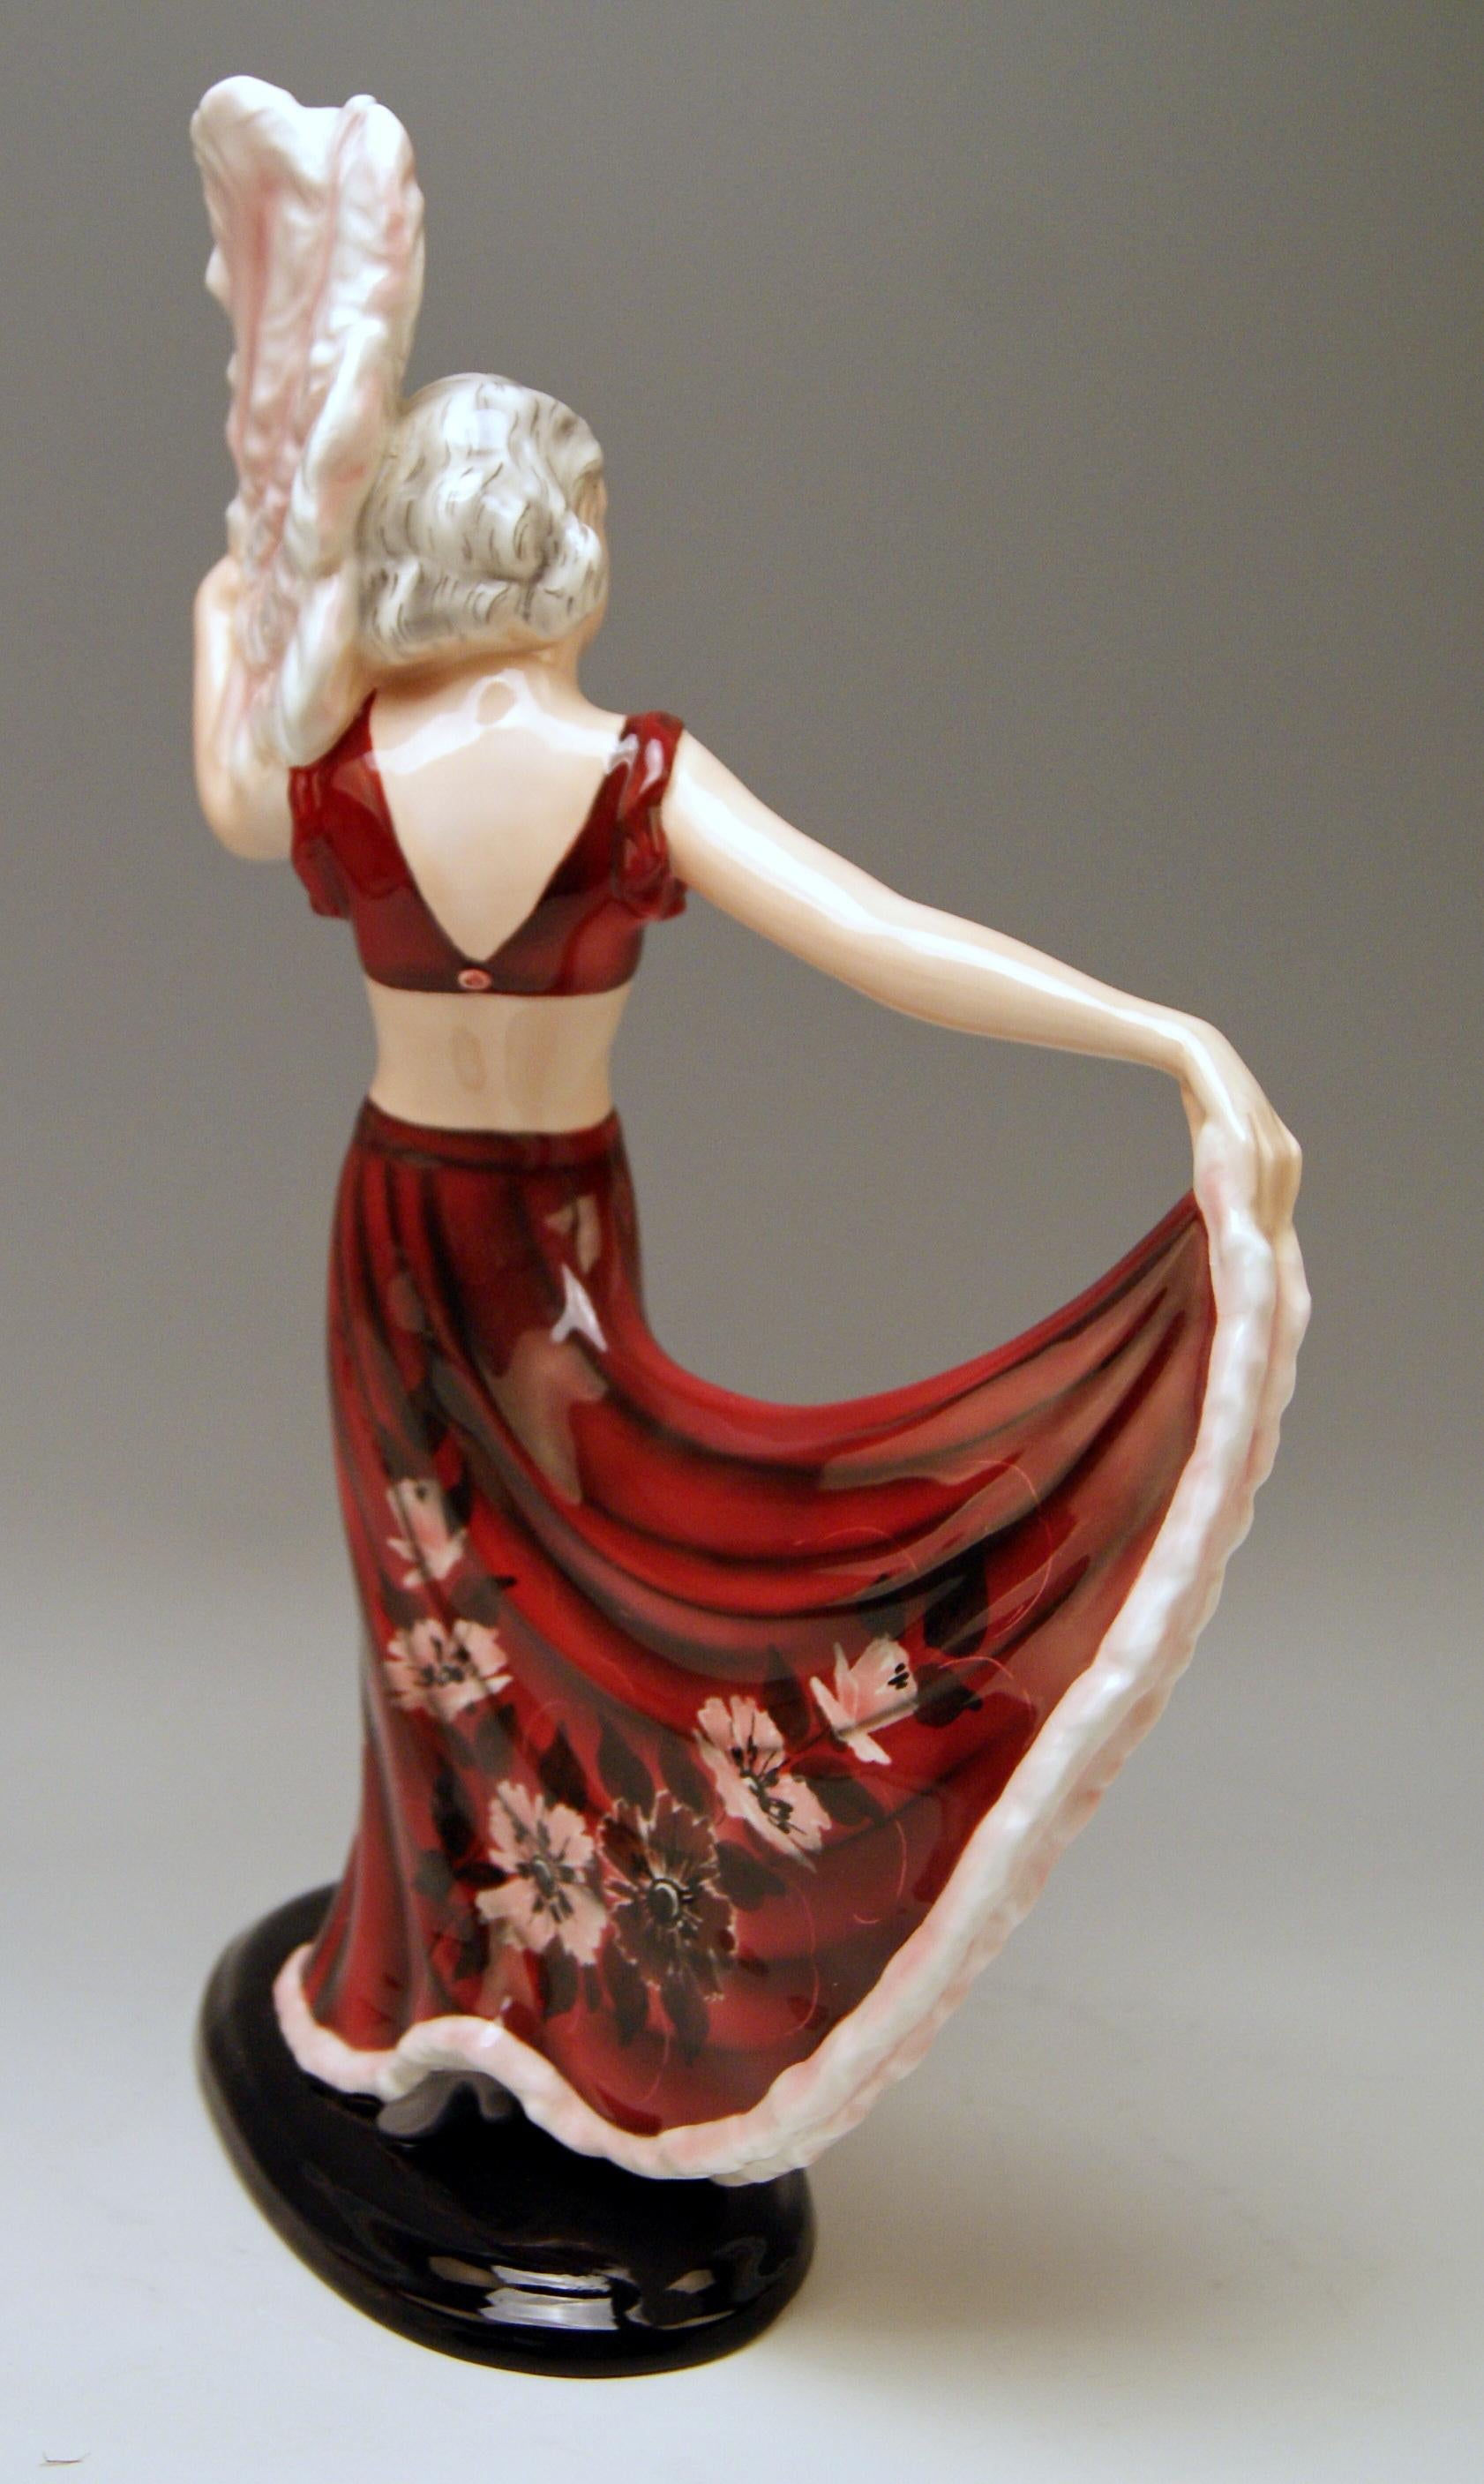 Goldscheider Vienna Very Interesting As Well As Rare Dancingy Lady Figurine.

Designed by Josef Lorenzl (1892-1950) / one of the most important designers having been active for Goldscheider manufactory in period of 1920-1940 / Model 8363 created